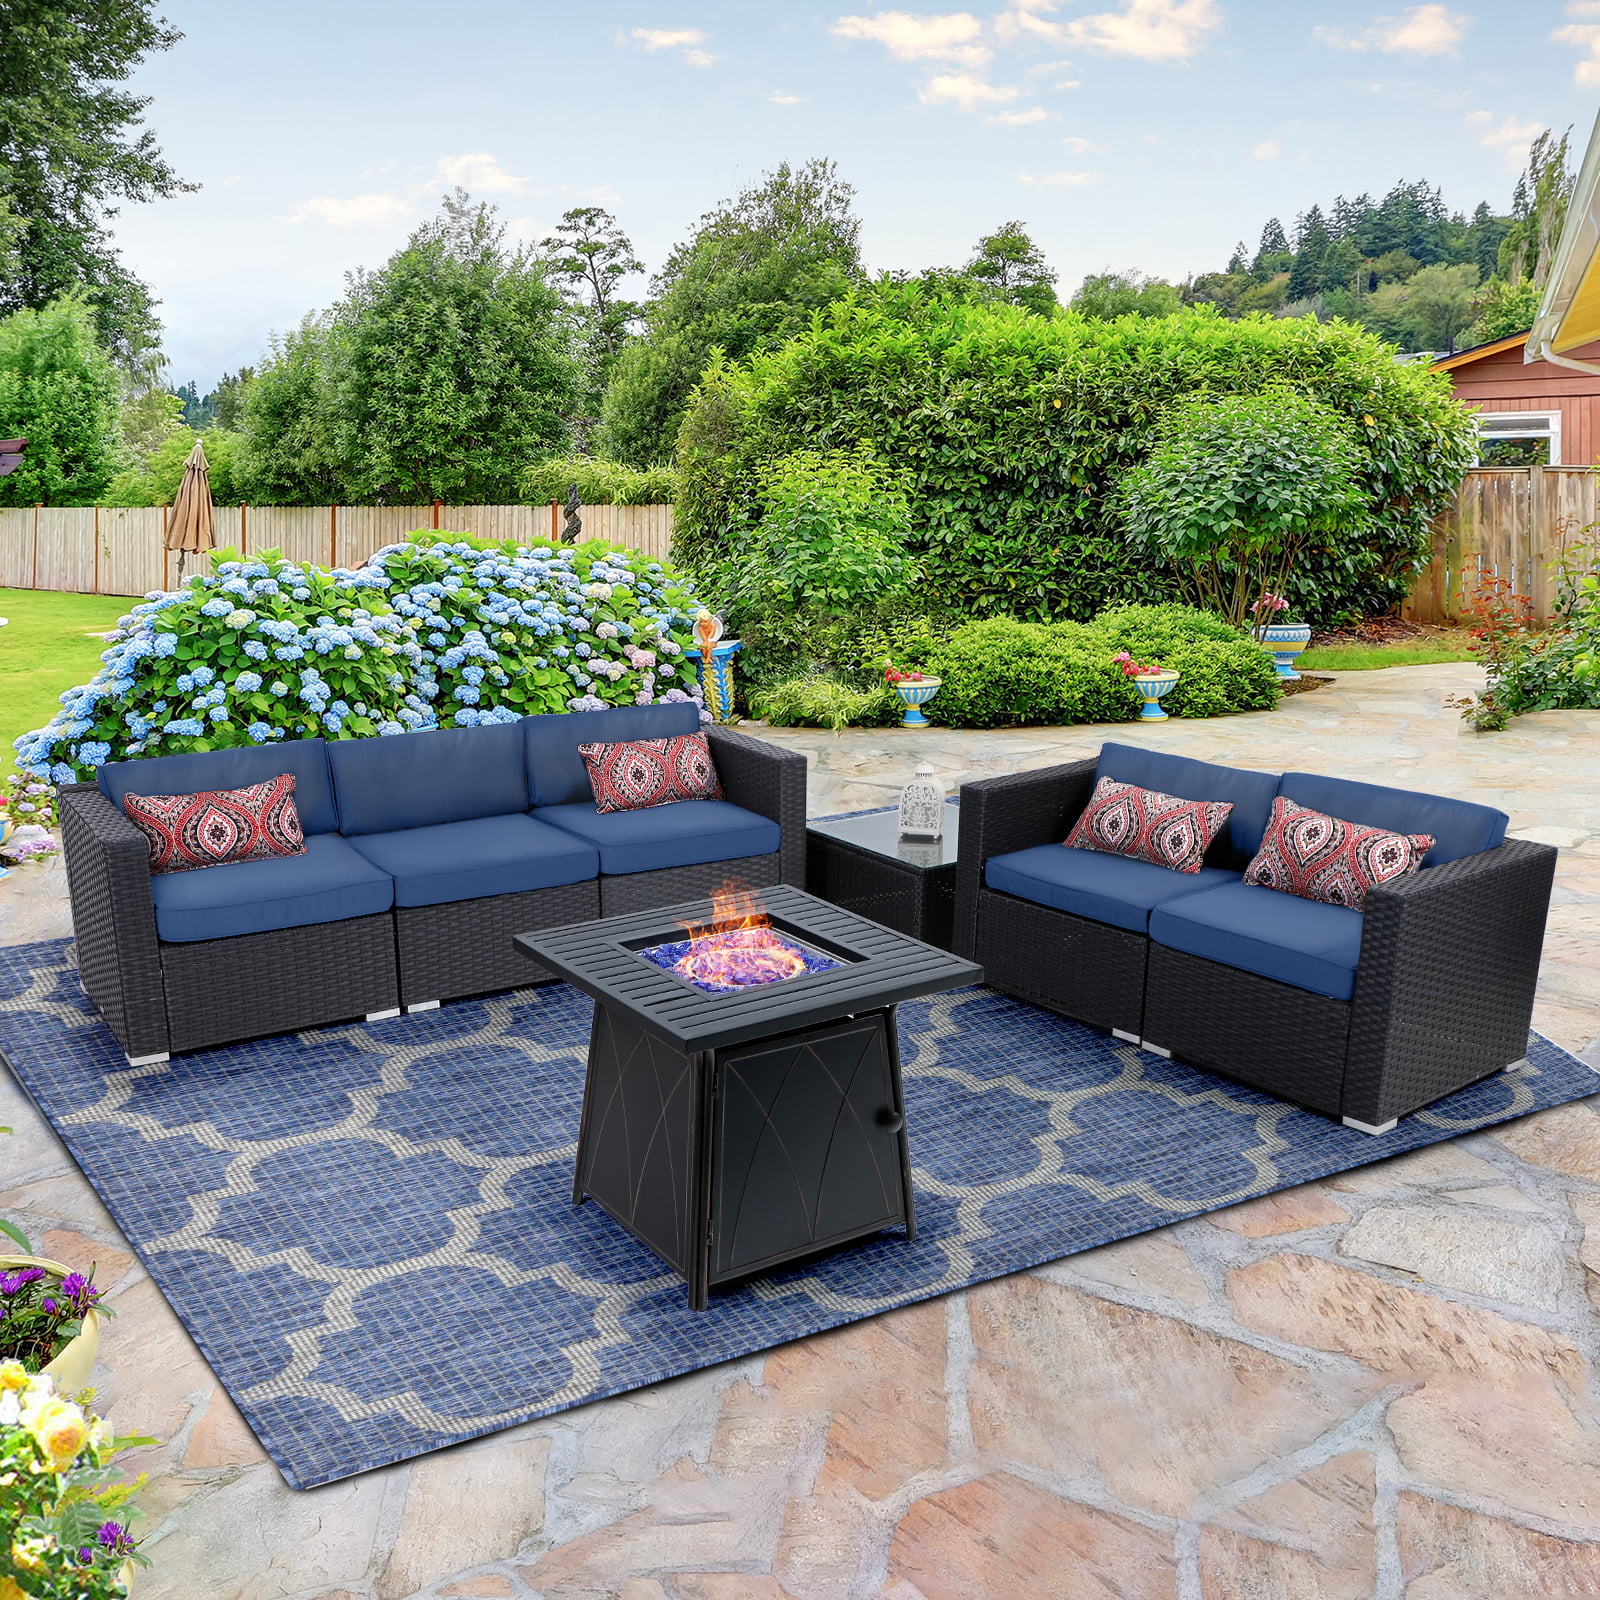 Outdoor Sectional Furniture Sets, Outdoor Sectional Furniture With Fire Pit